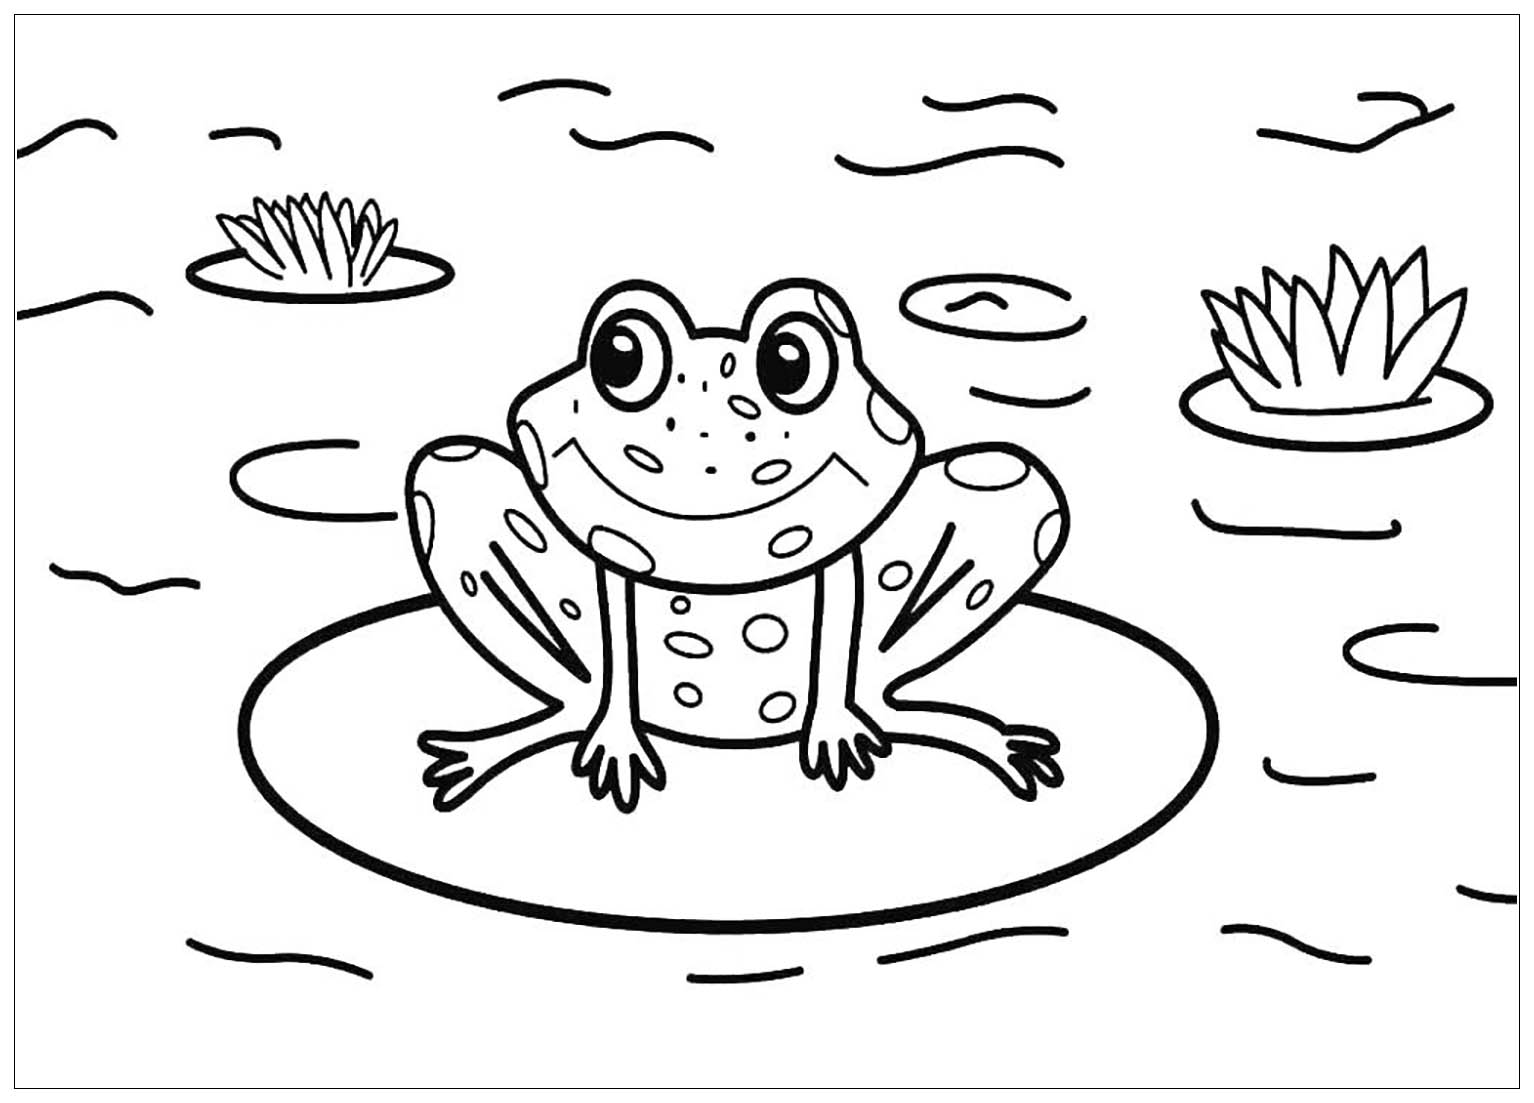 Cool frog coloring pages to print and color